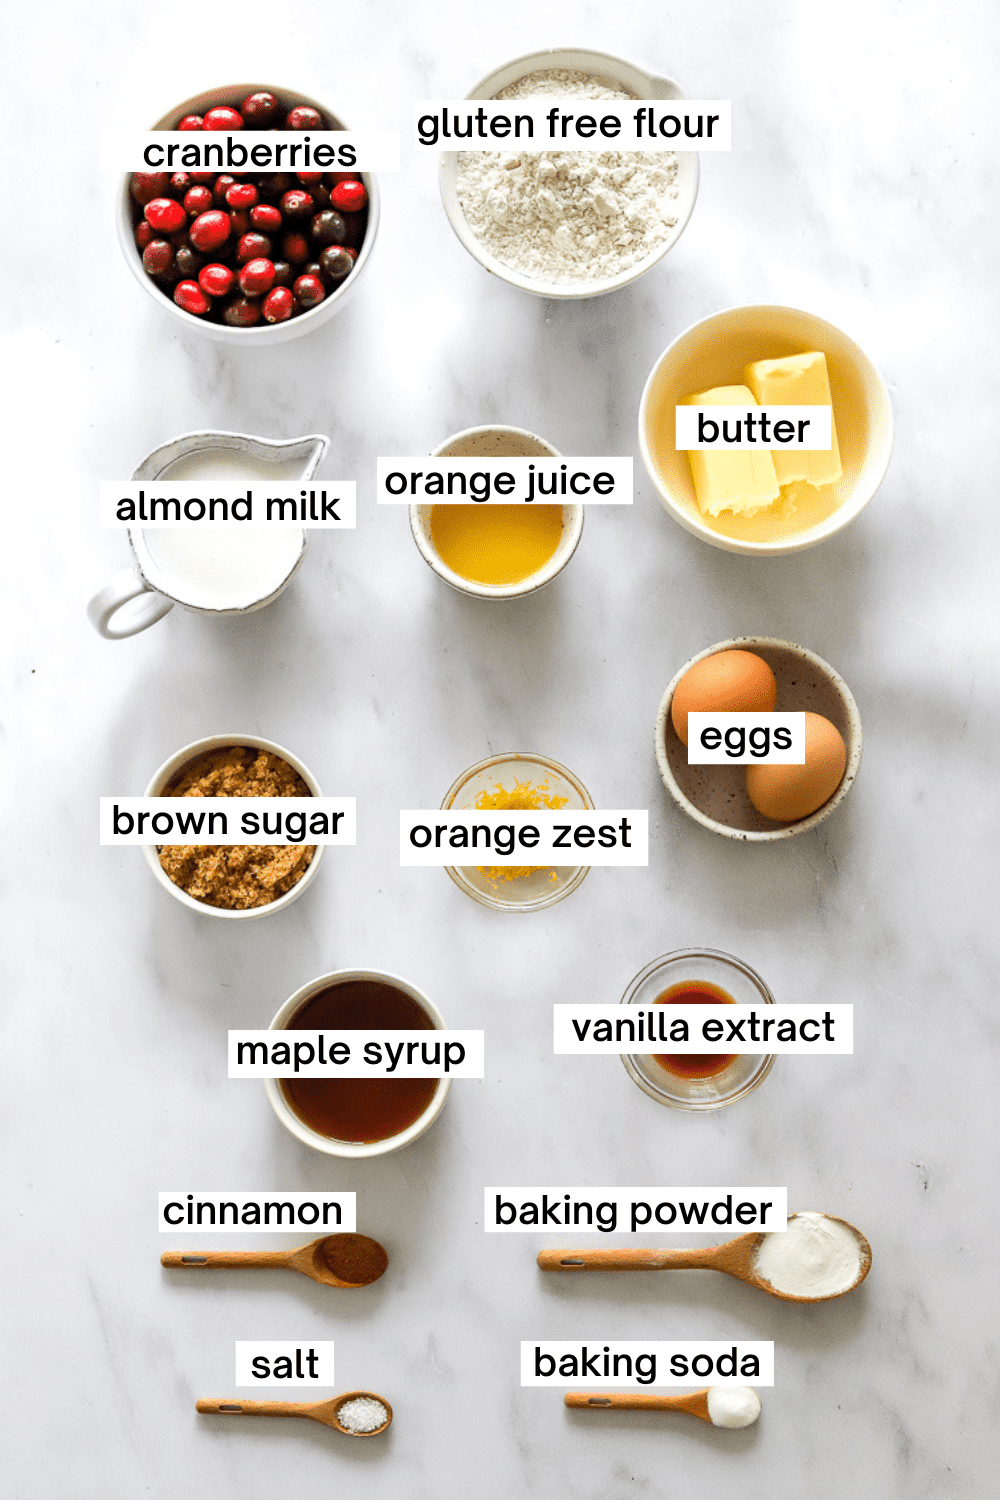 Orange cranberry muffins ingredients with labels for each ingredient.